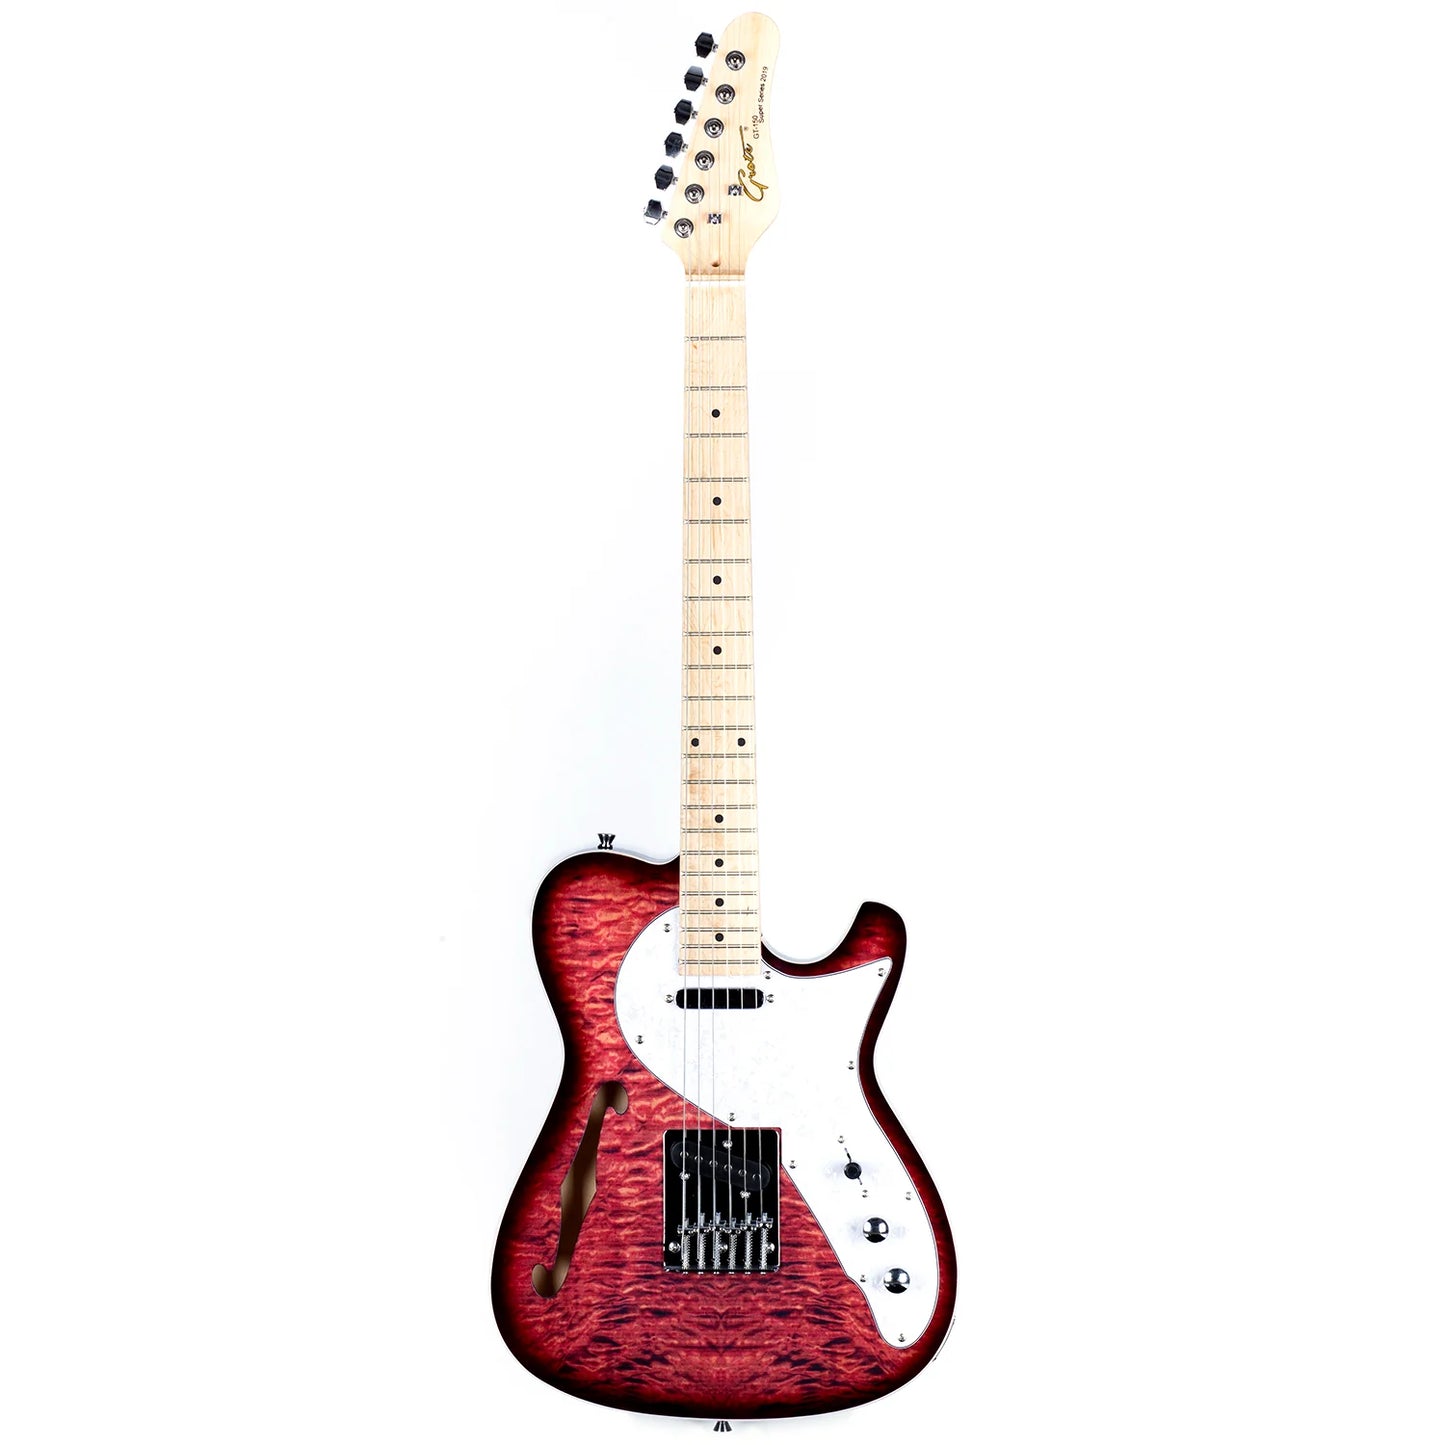 GROTE ELECTRIC GUITAR SEMI-HOLLOW BODY SINGLE F-HOLE TELE STYLE GUITAR FULL-SIZE BASSWOOD WITH CANADIA MAPLE NECK CHROME HARDWARE PICKS - RED